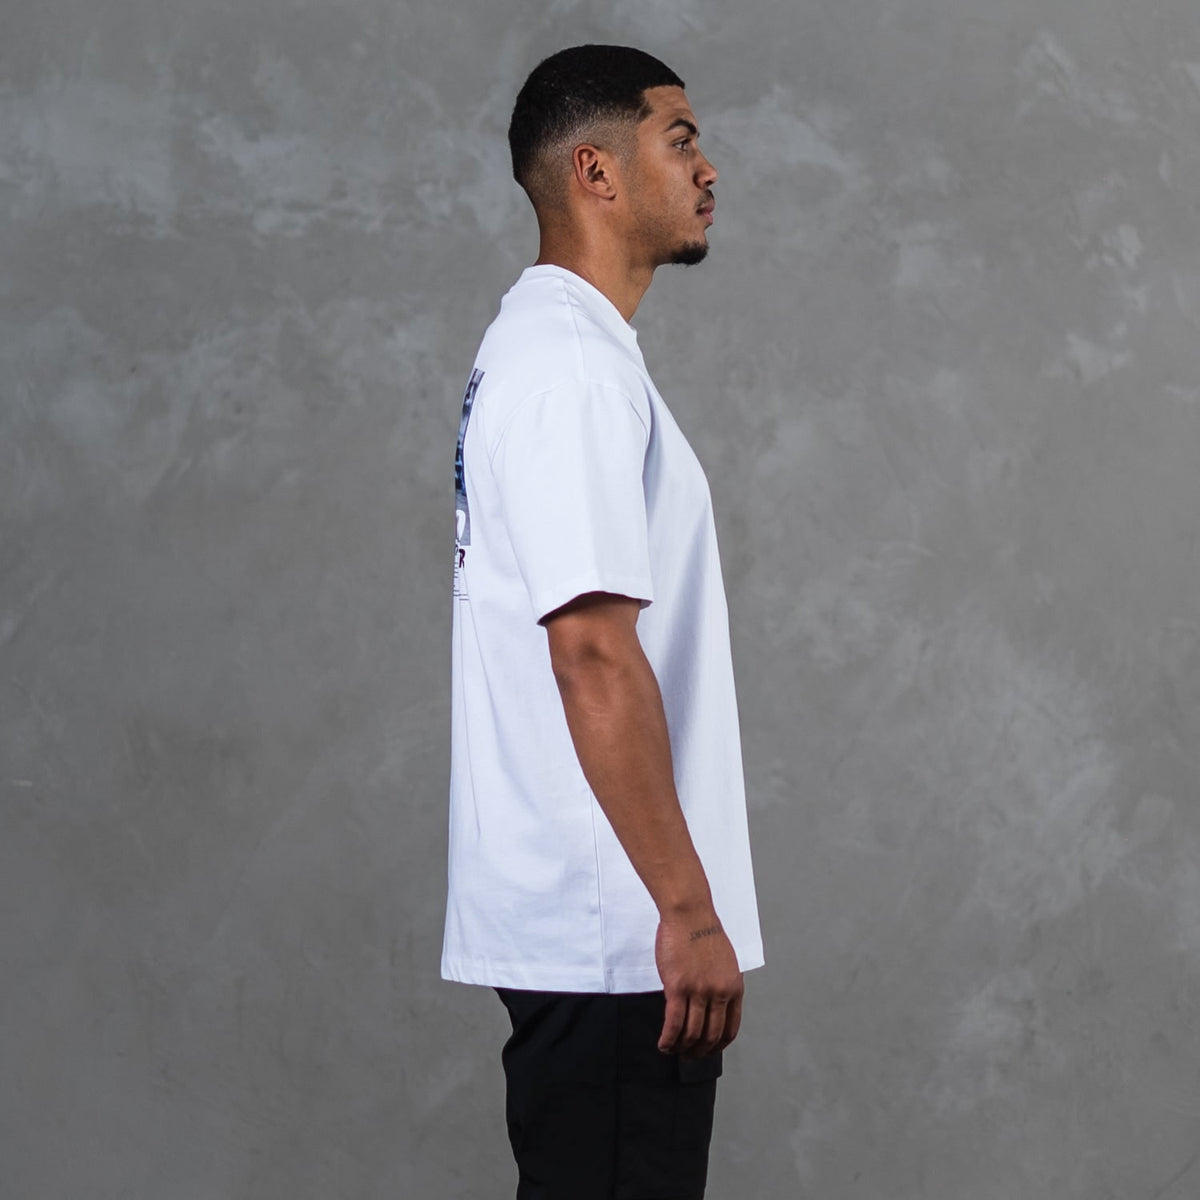 512 BB Relaxed Fit Tee White